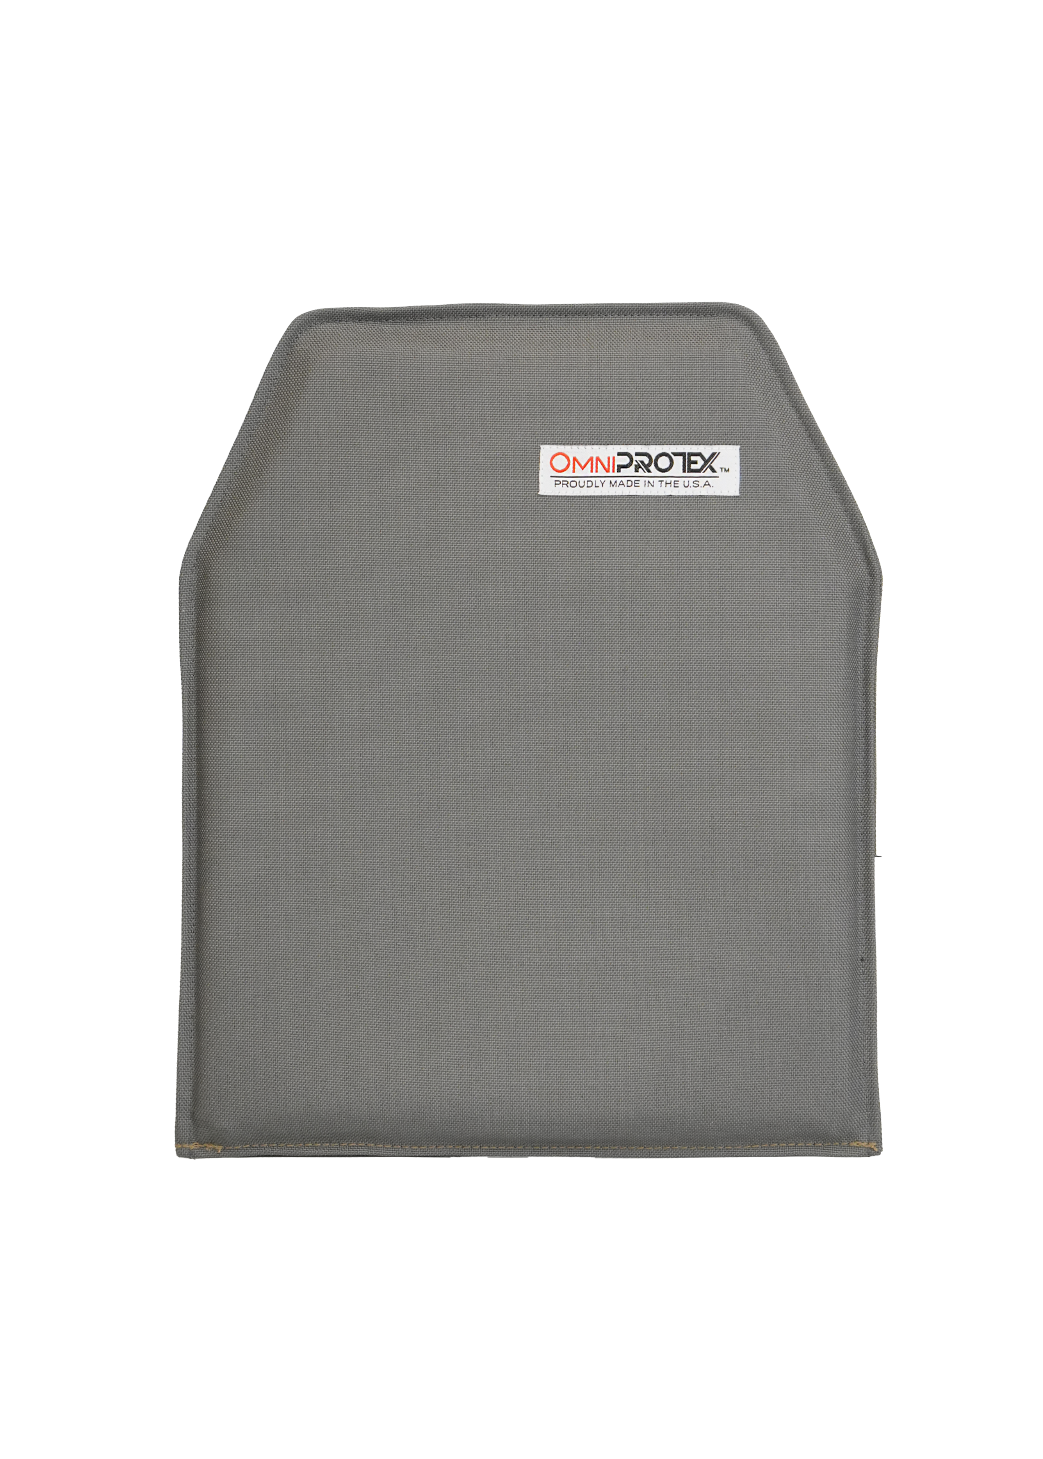 Our SAPI 10x12 bulletproof armor insert offers reliable NIJ Level IIIA protection for military, law enforcement, and civilian use. Lightweight and durable, this insert fits most plate carriers and tactical vests. Shop now for superior personal defense.